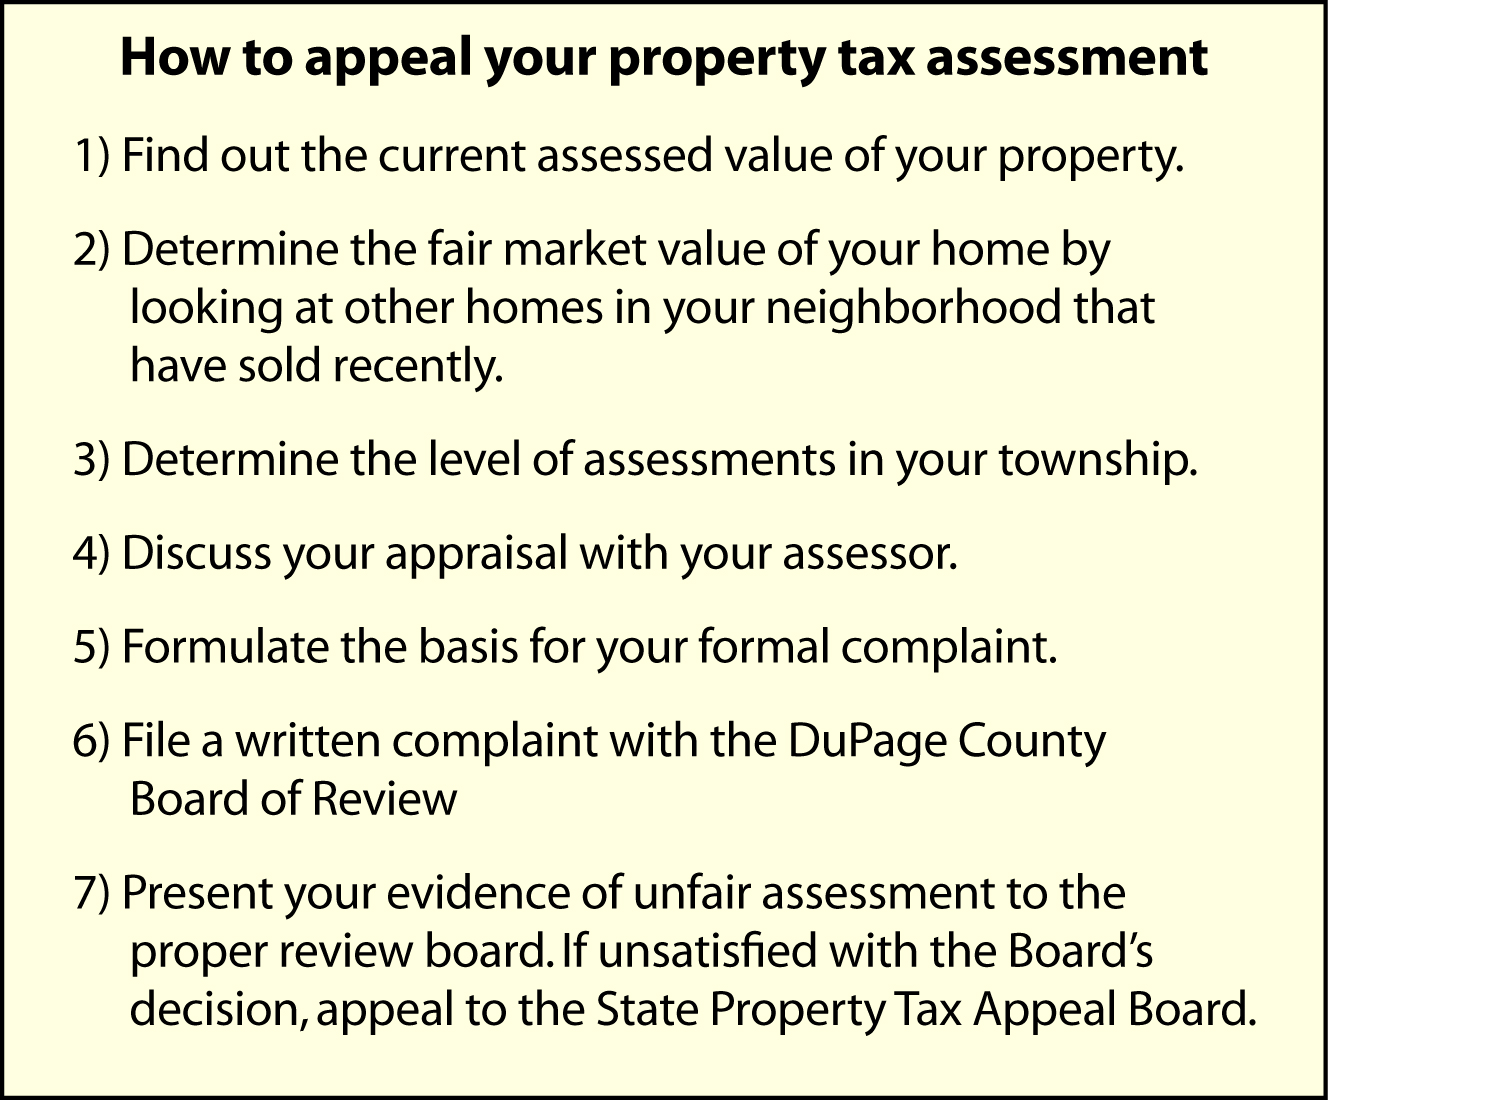 What determines the property value determined by a tax assessor?